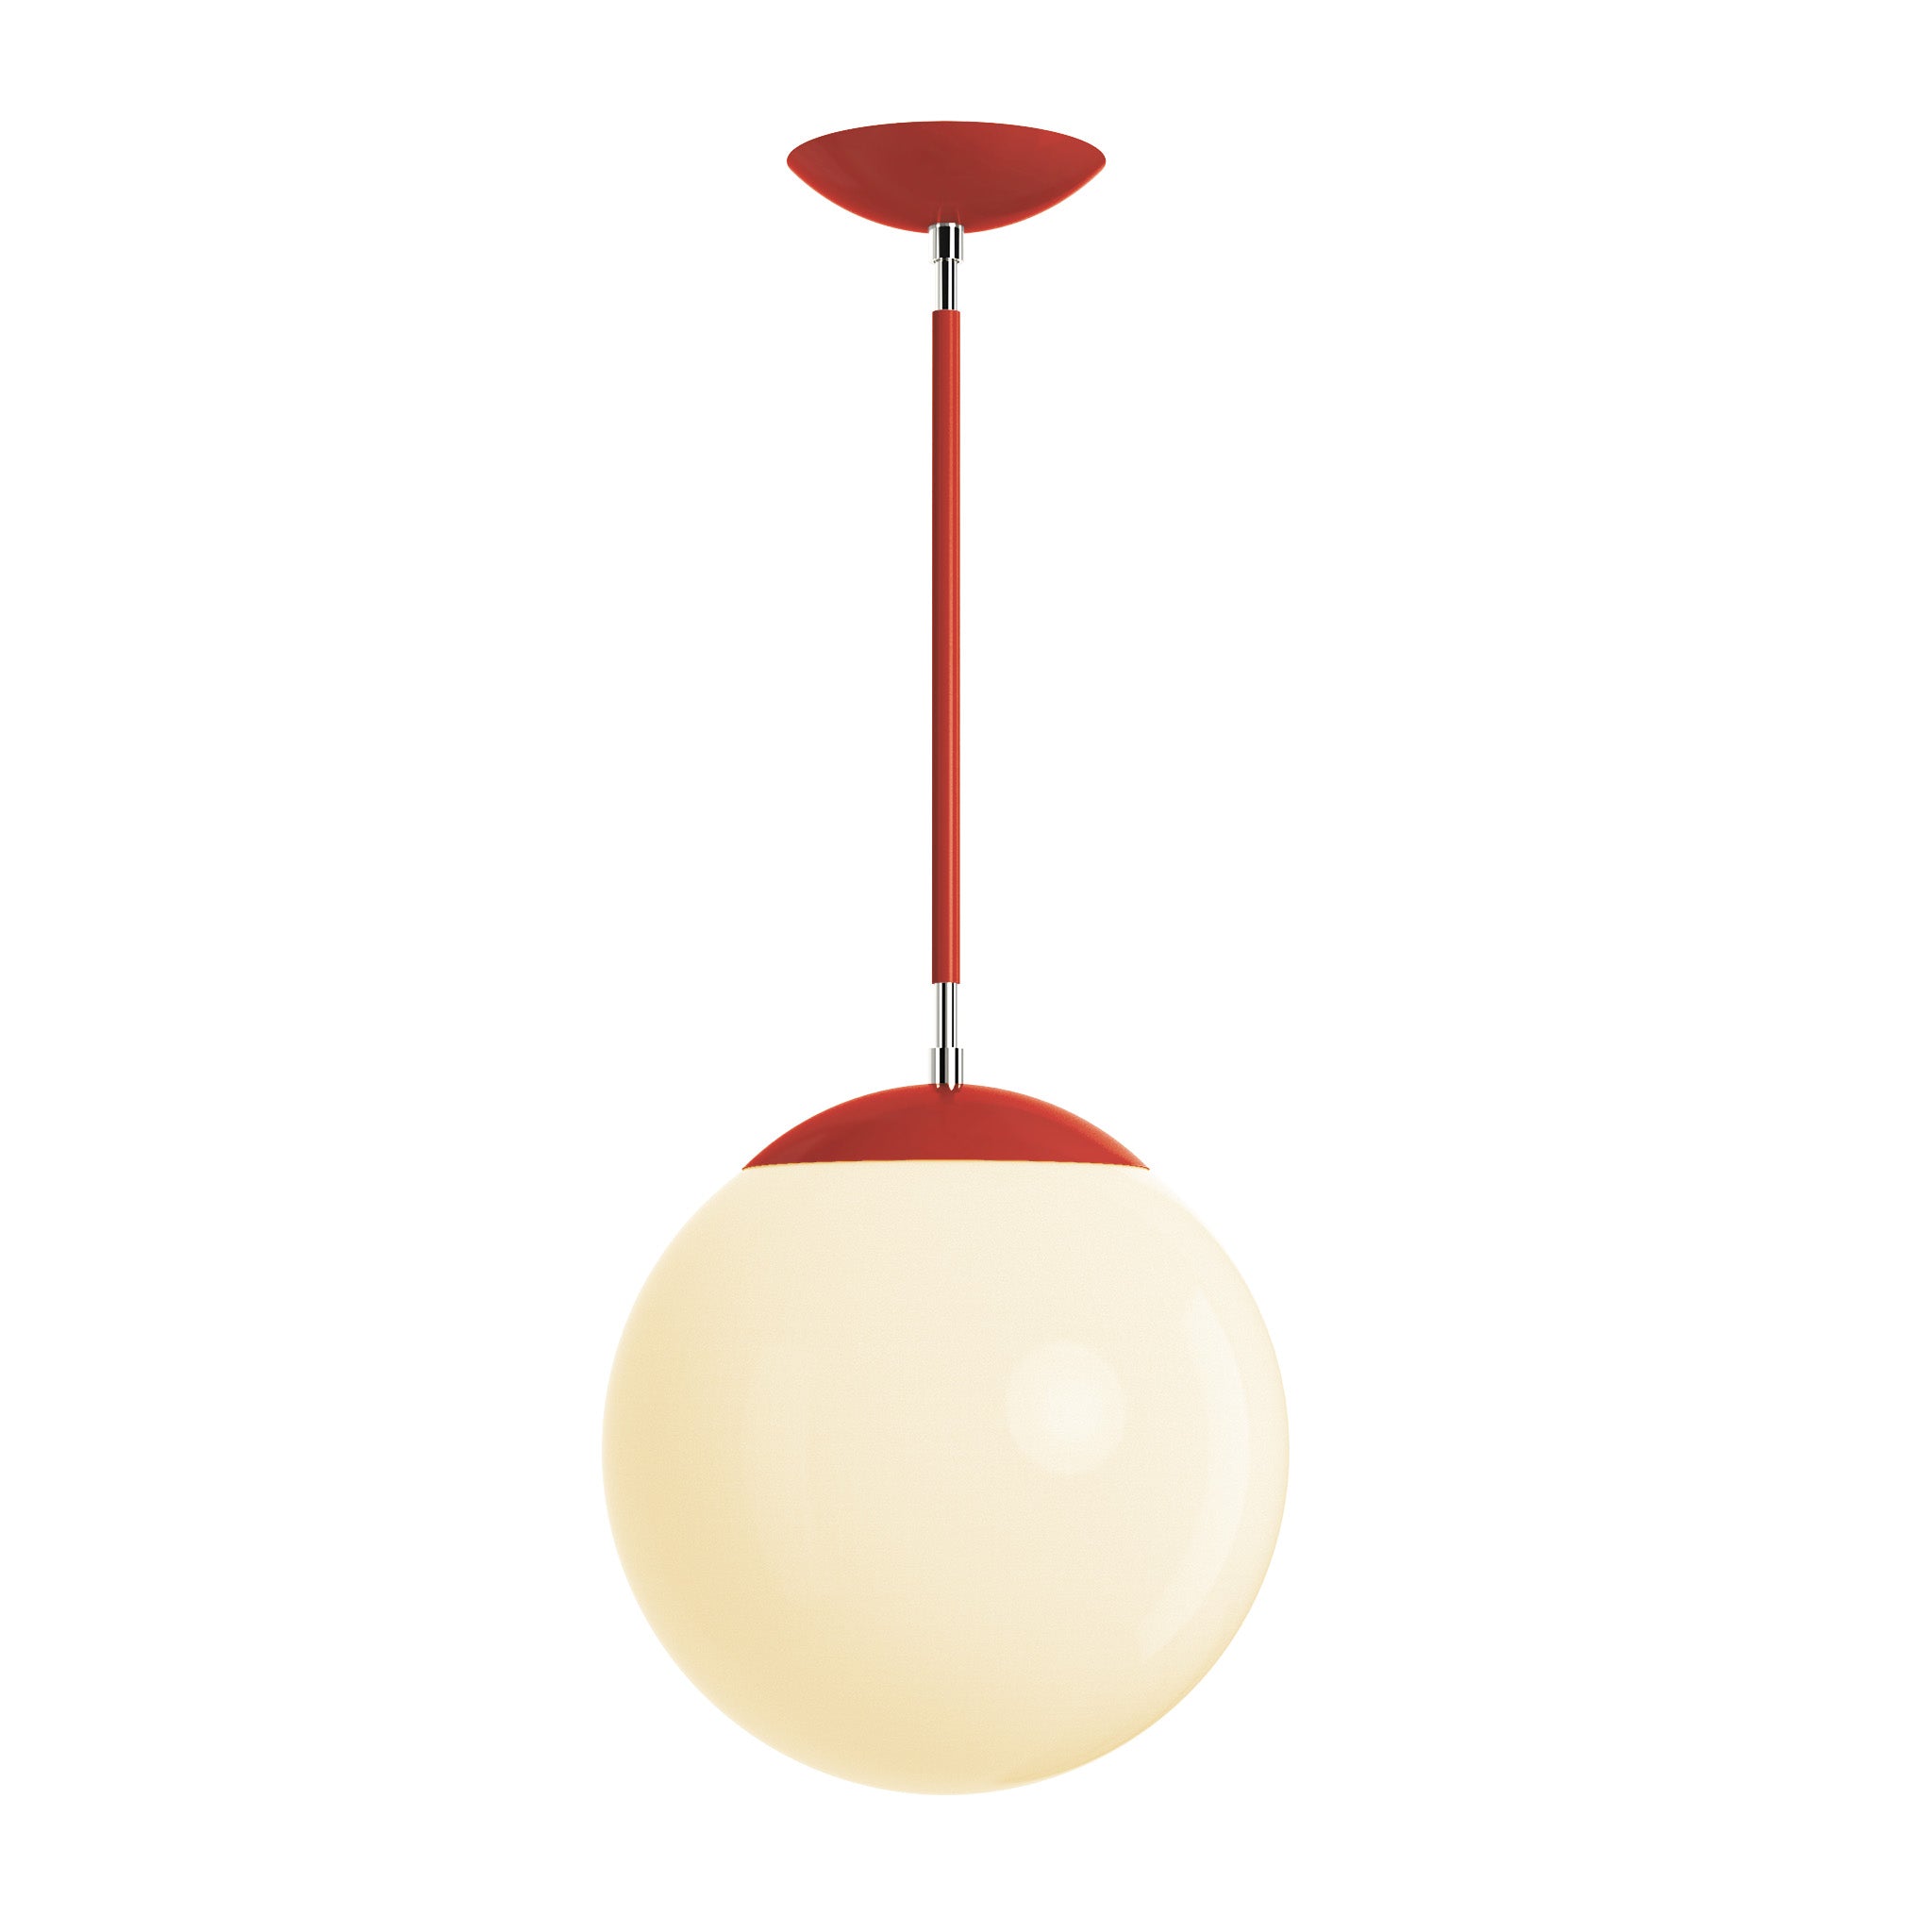 Polished nickel and riding hood red cap globe pendant 12" dutton brown lighting